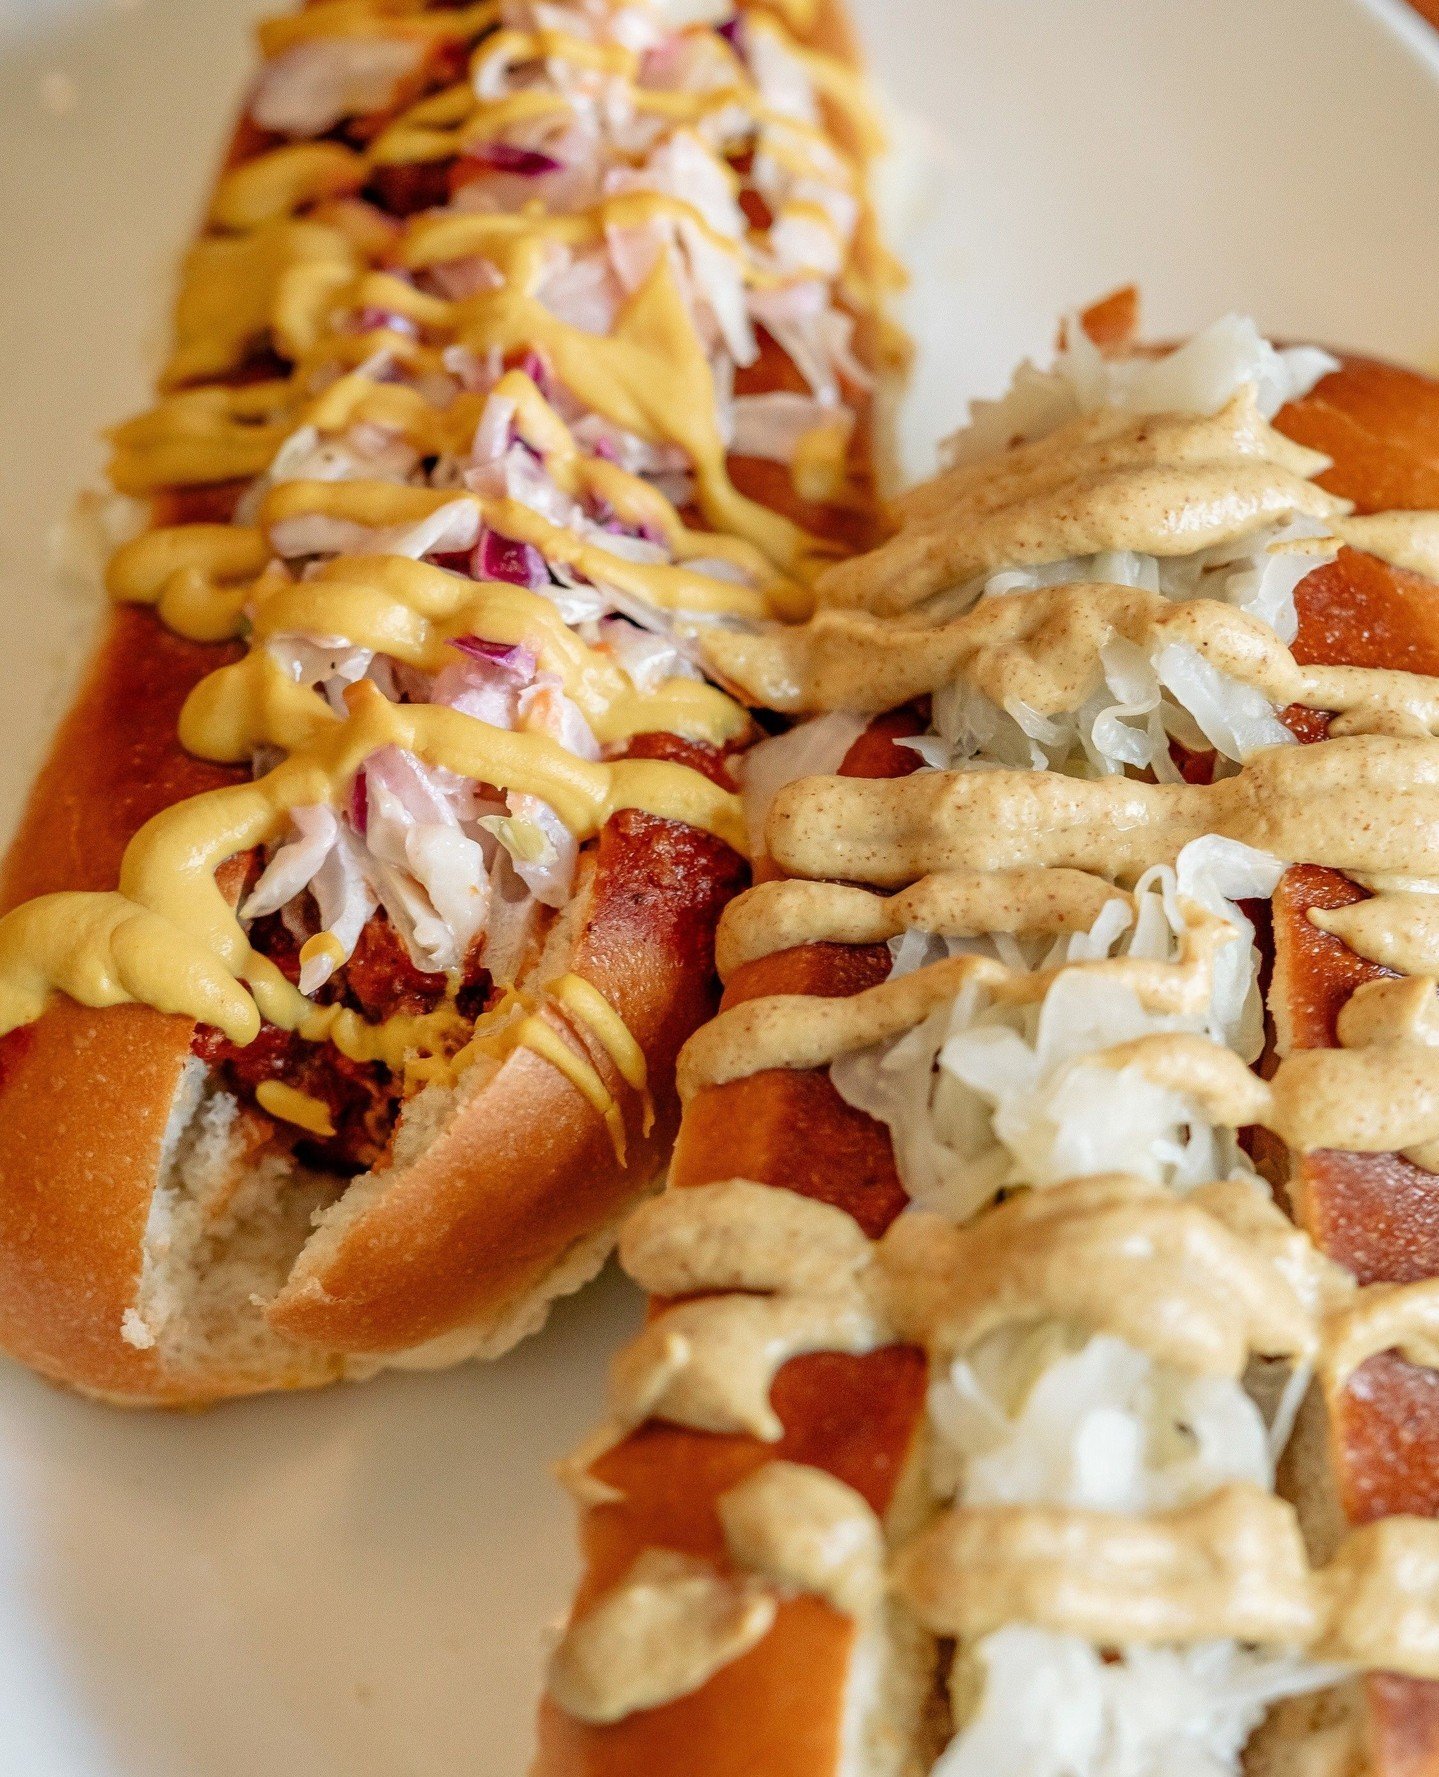 Are you an ATL Dog fan or a New York Dog fan? Let us know in the comments what your vote is! 🌭⁠
⁠
⁠
#nydog #atldog #thealbertatl #inmanpark #atleats #atlantafoodies⁠